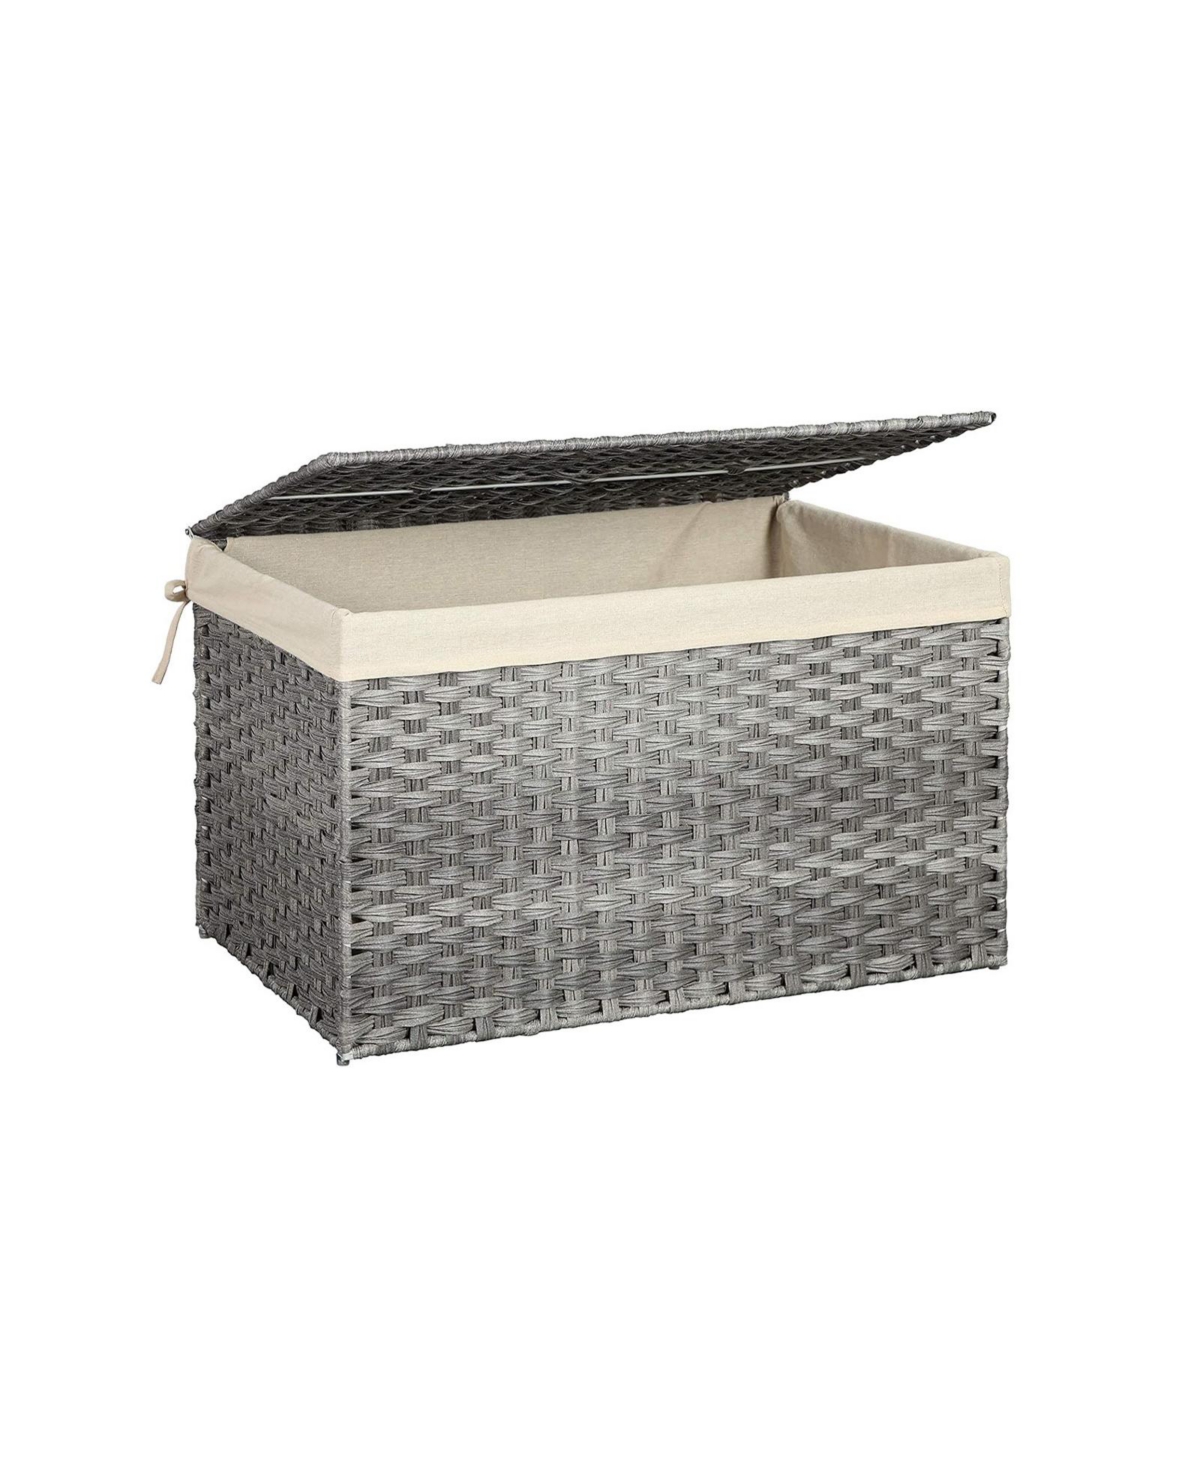 Storage Box With Cotton Liner, Rattan-style Storage Basket, Storage Trunk With Lid And Handles - Grey